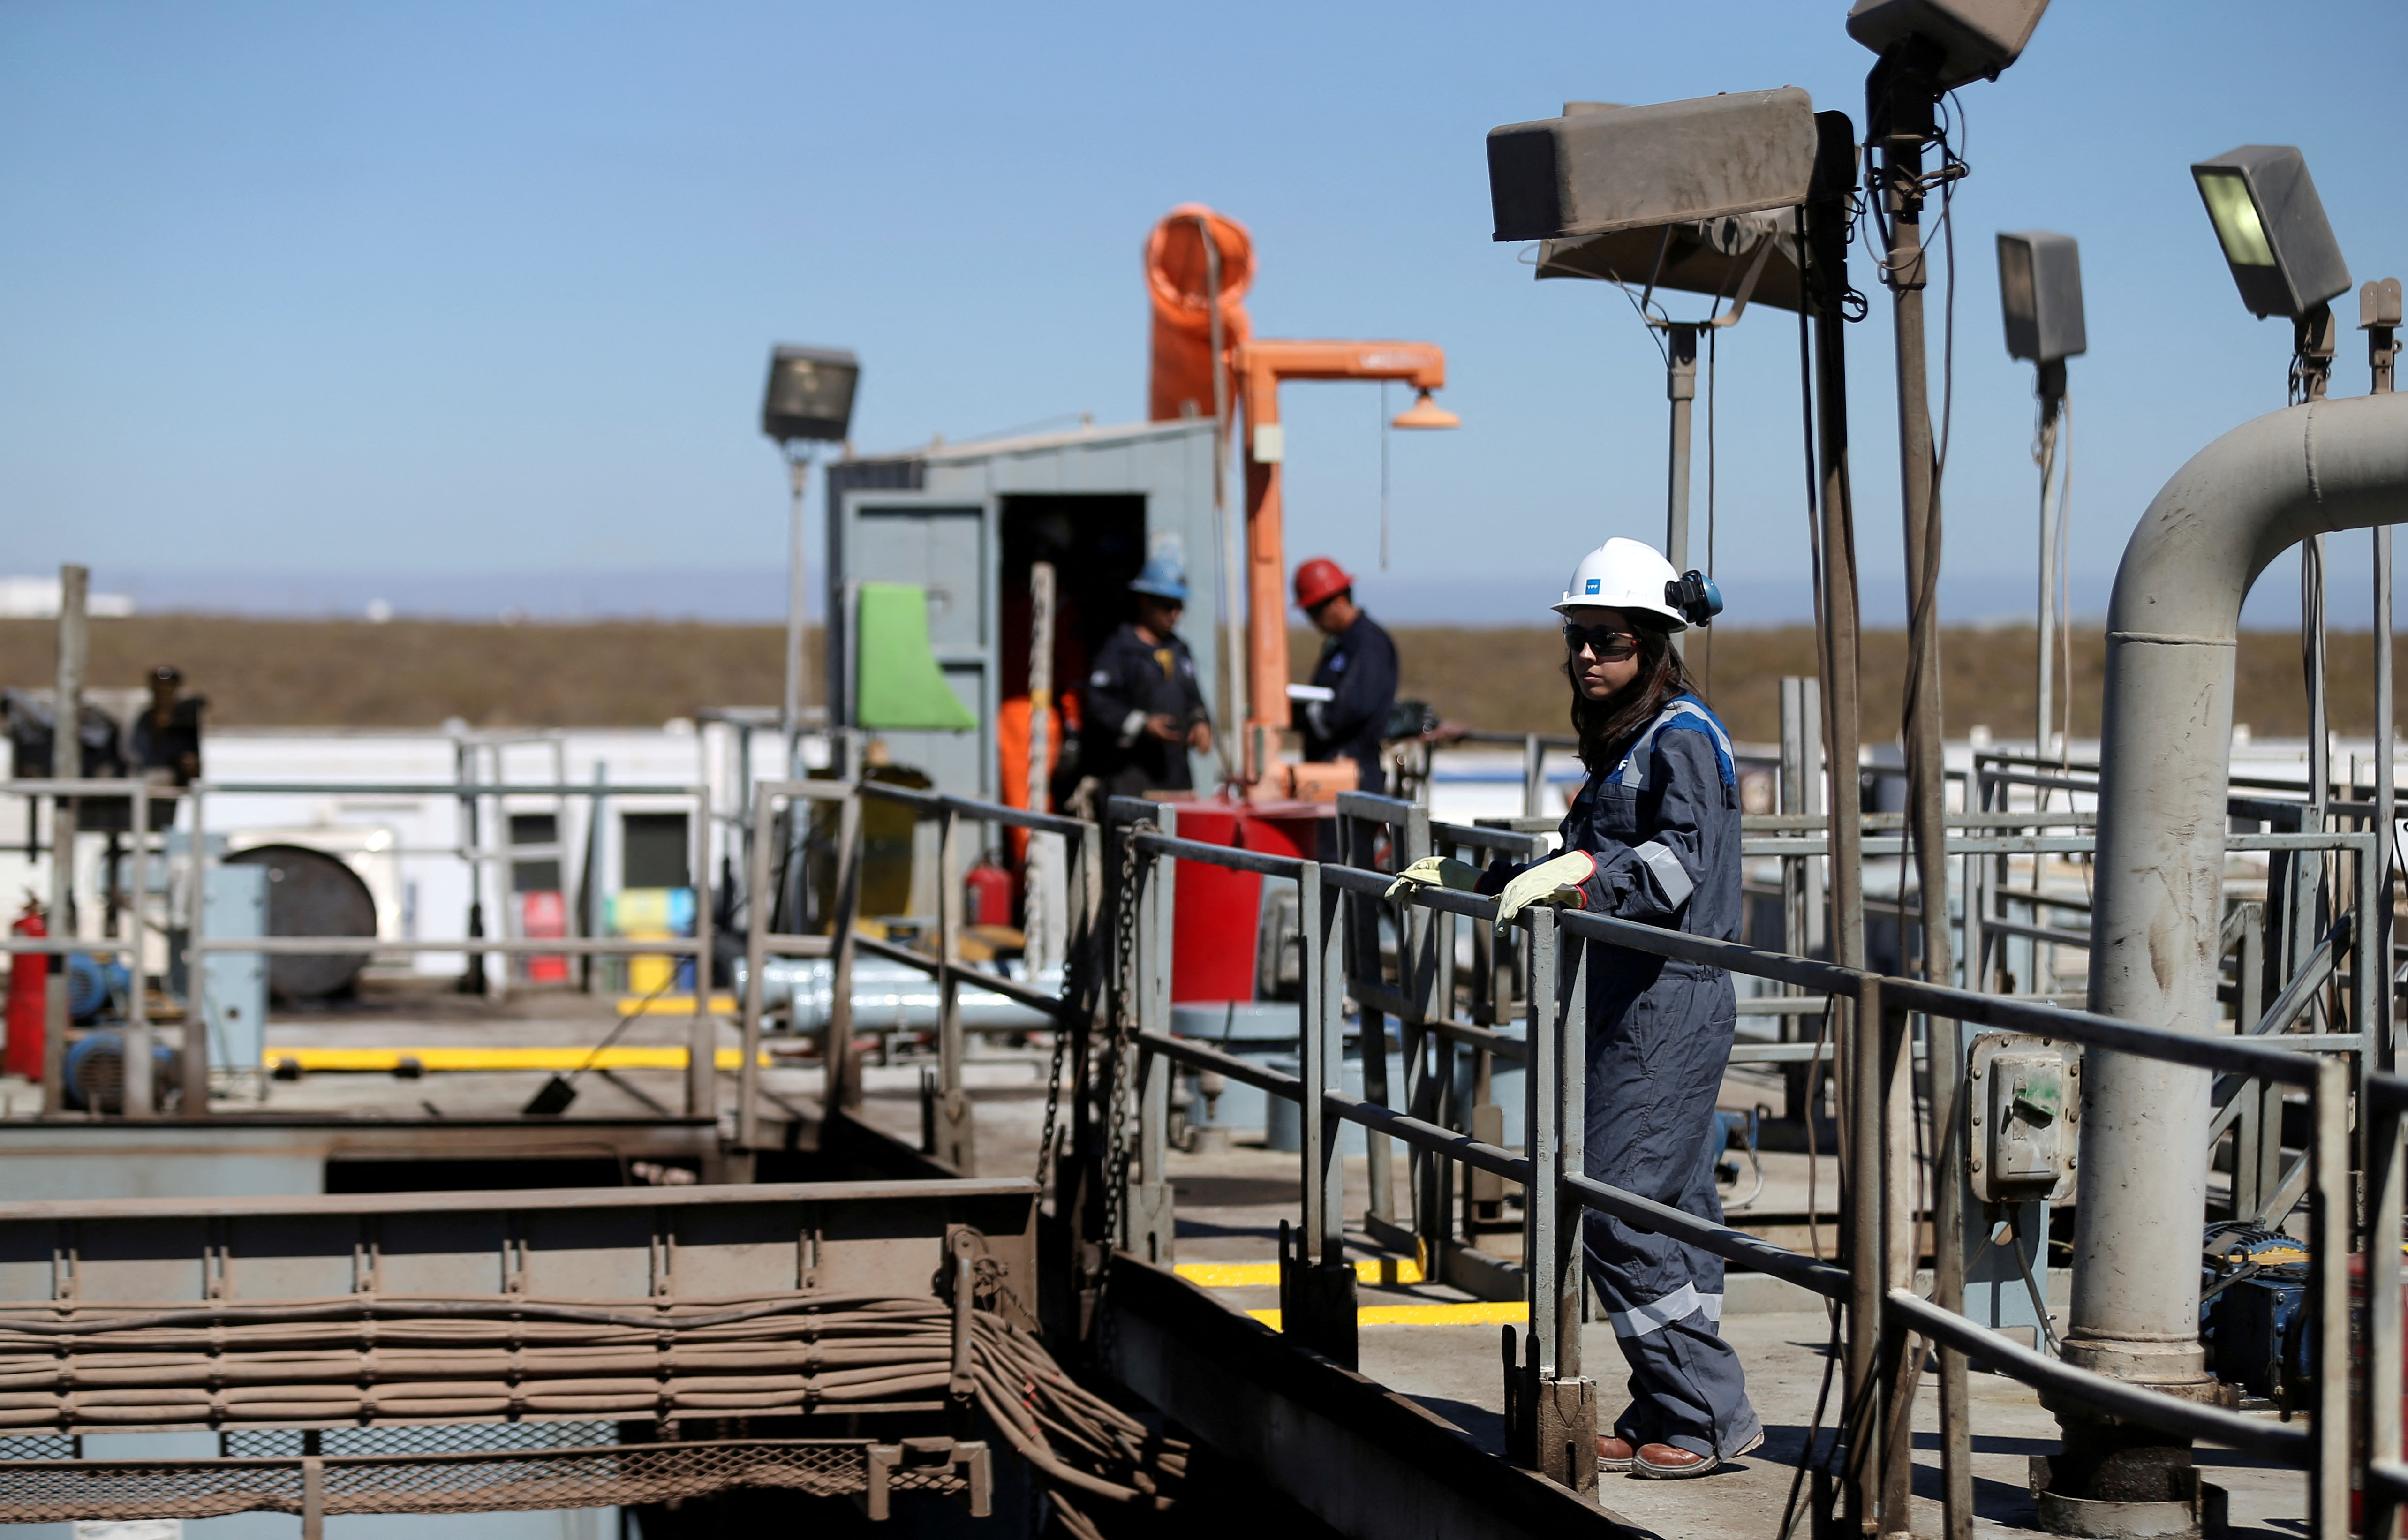 FILE PHOTO: A worker looks on over a platform in a drilling rig at Vaca Muerta shale oil and gas drilling, in the Patagonian province of Neuquen, Argentina January 21, 2019. Picture taken January 21, 2019. REUTERS/Agustin Marcarian/File Photo